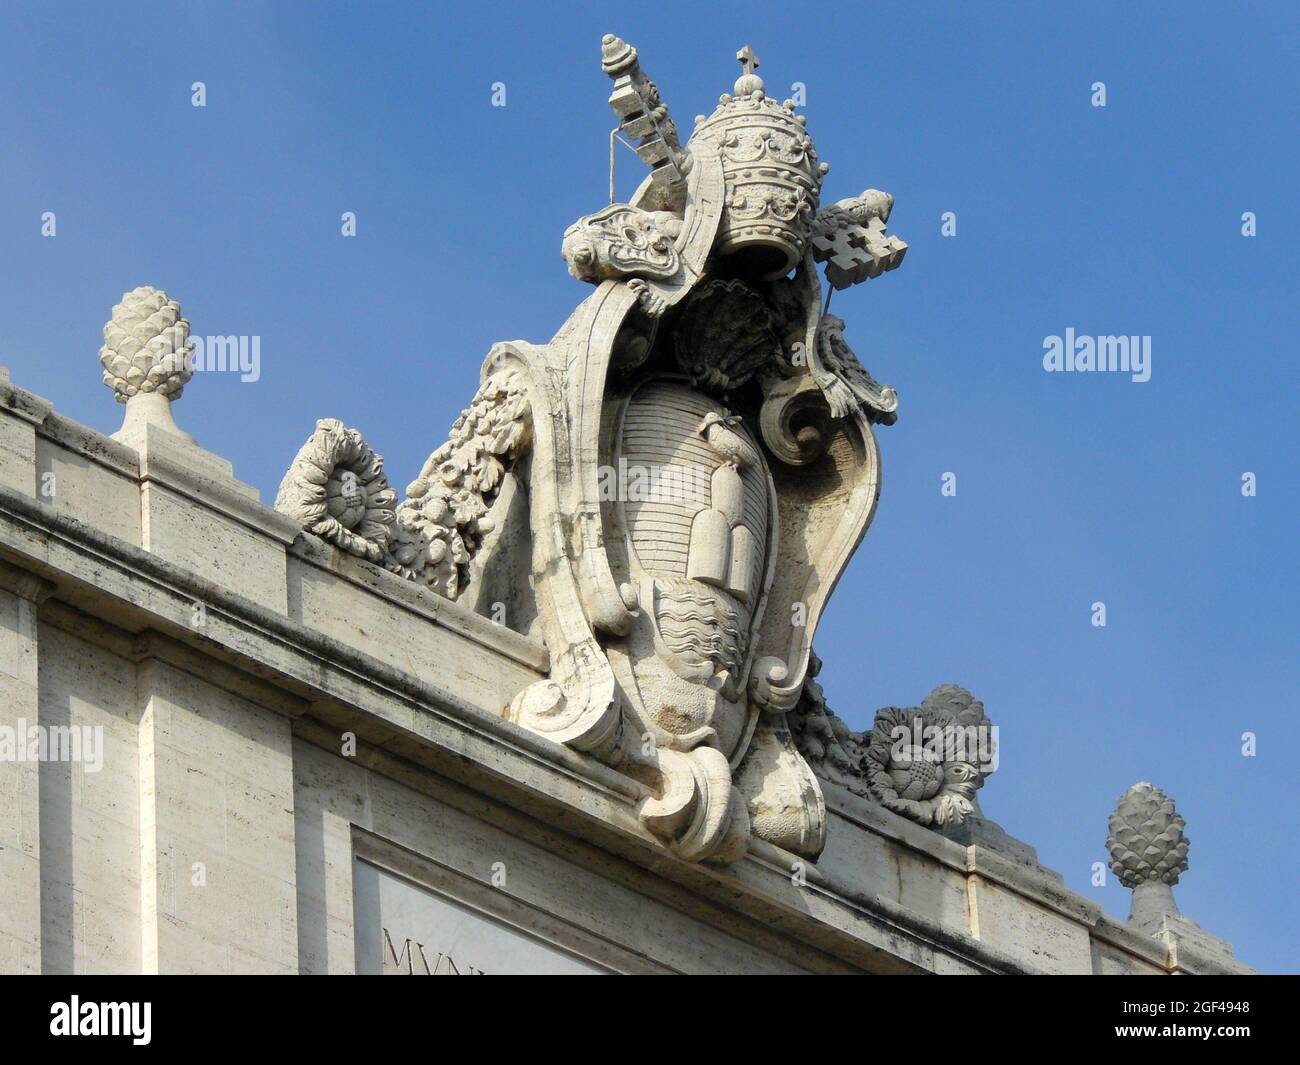 Vatican City (Italy). Shield of Alexander VII on the main facade of St. Peter's Basilica in Vatican City. Stock Photo